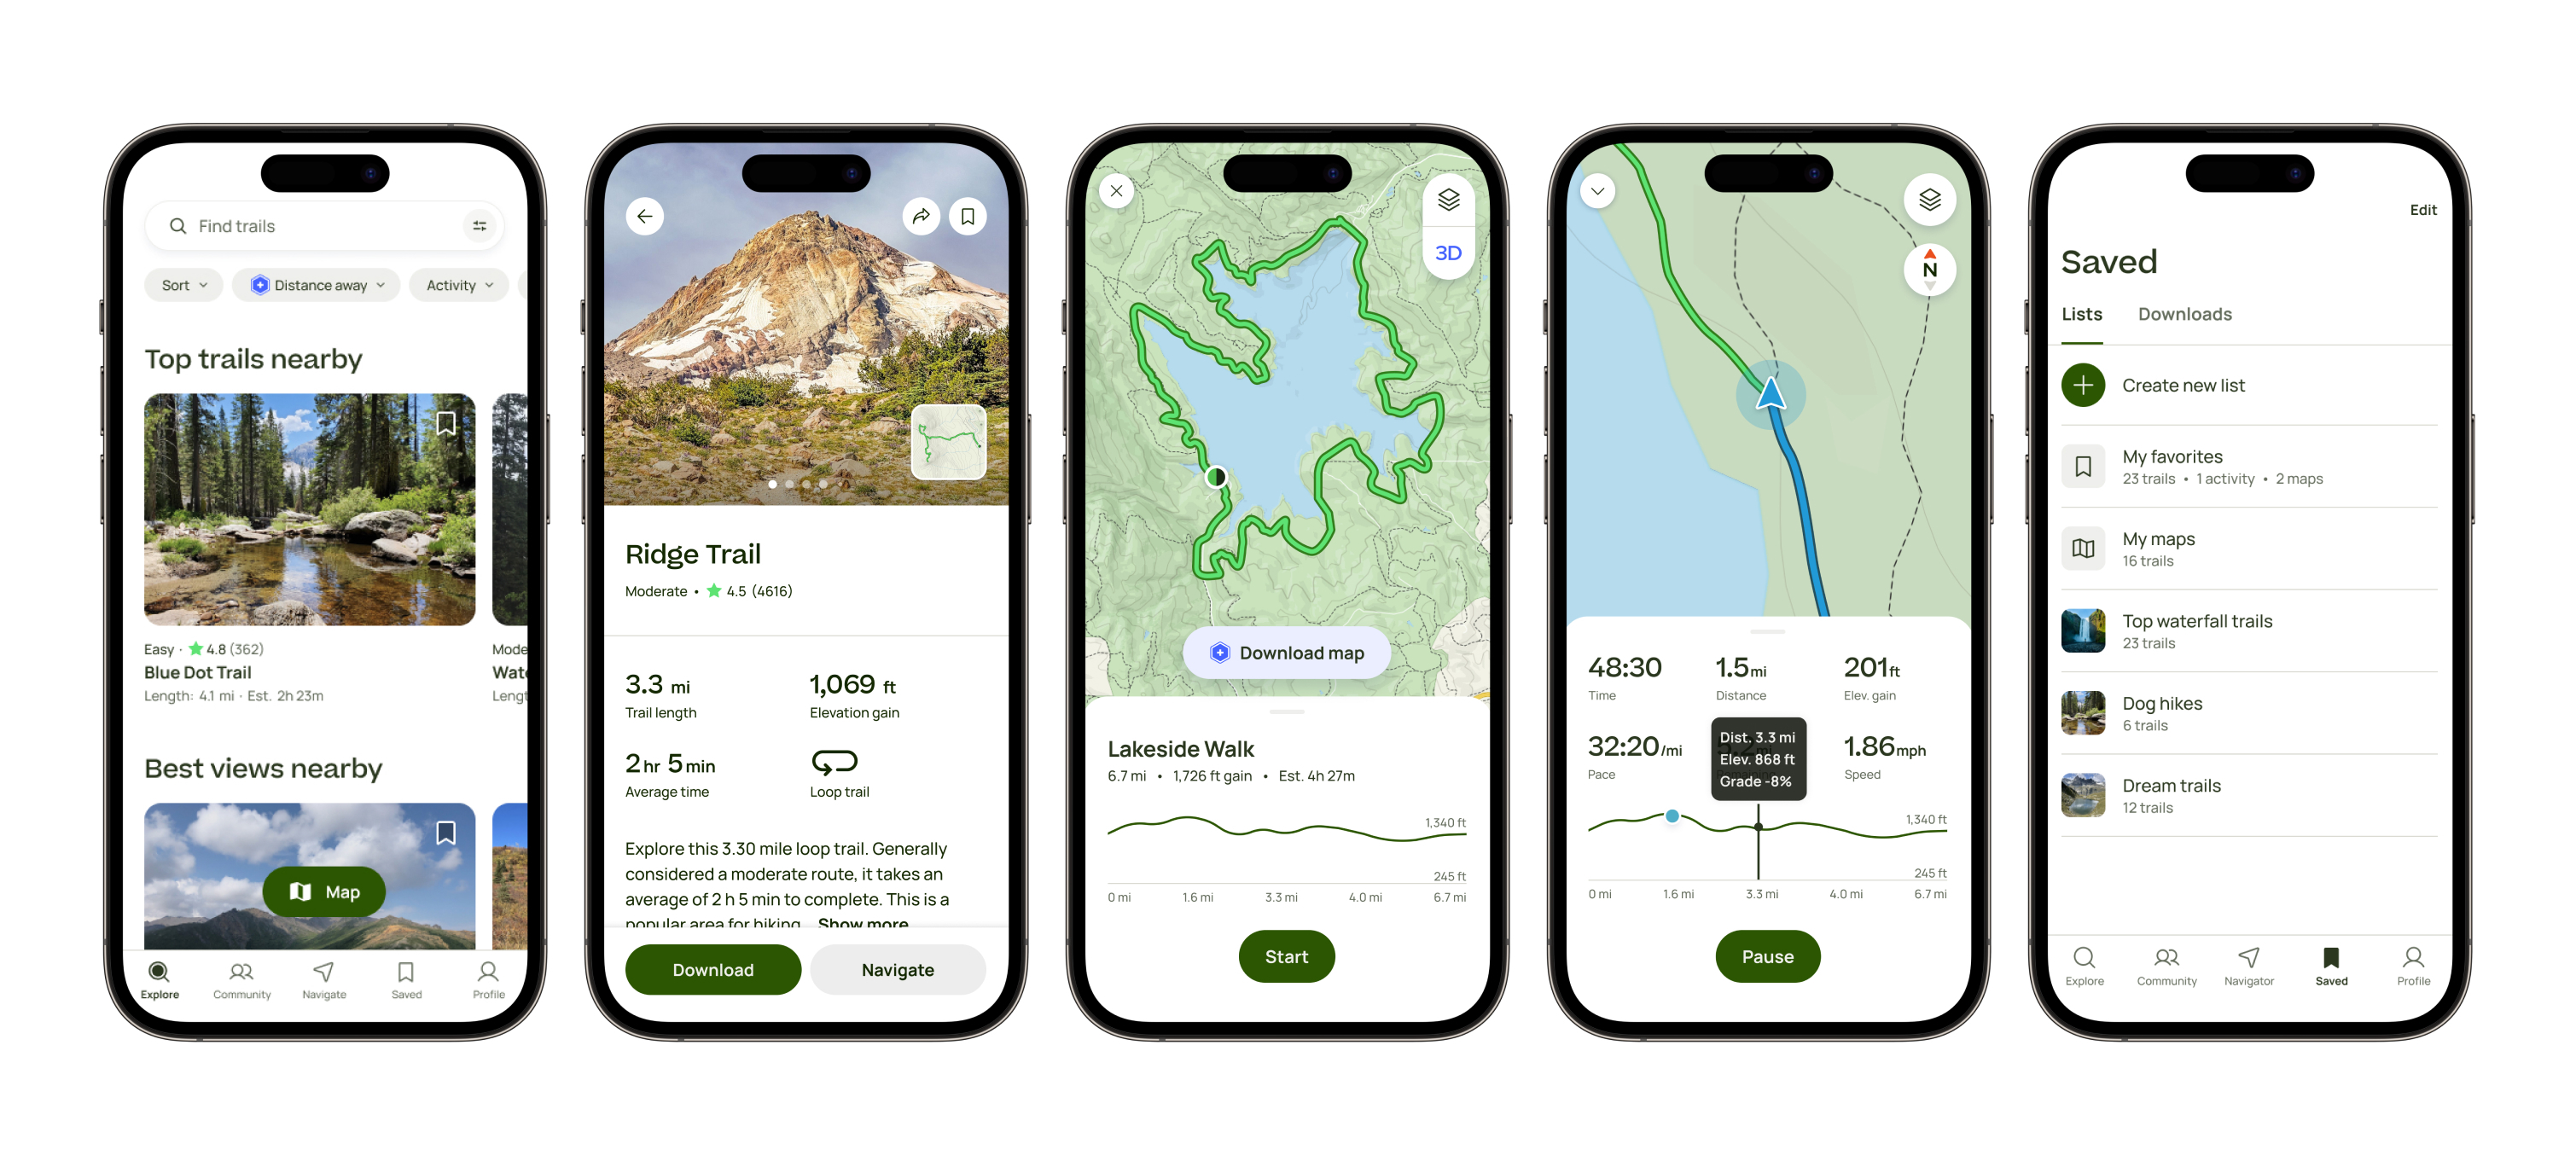 Five smartphone screens showing a trail navigation app with various features like trail maps, navigation, and saved routes